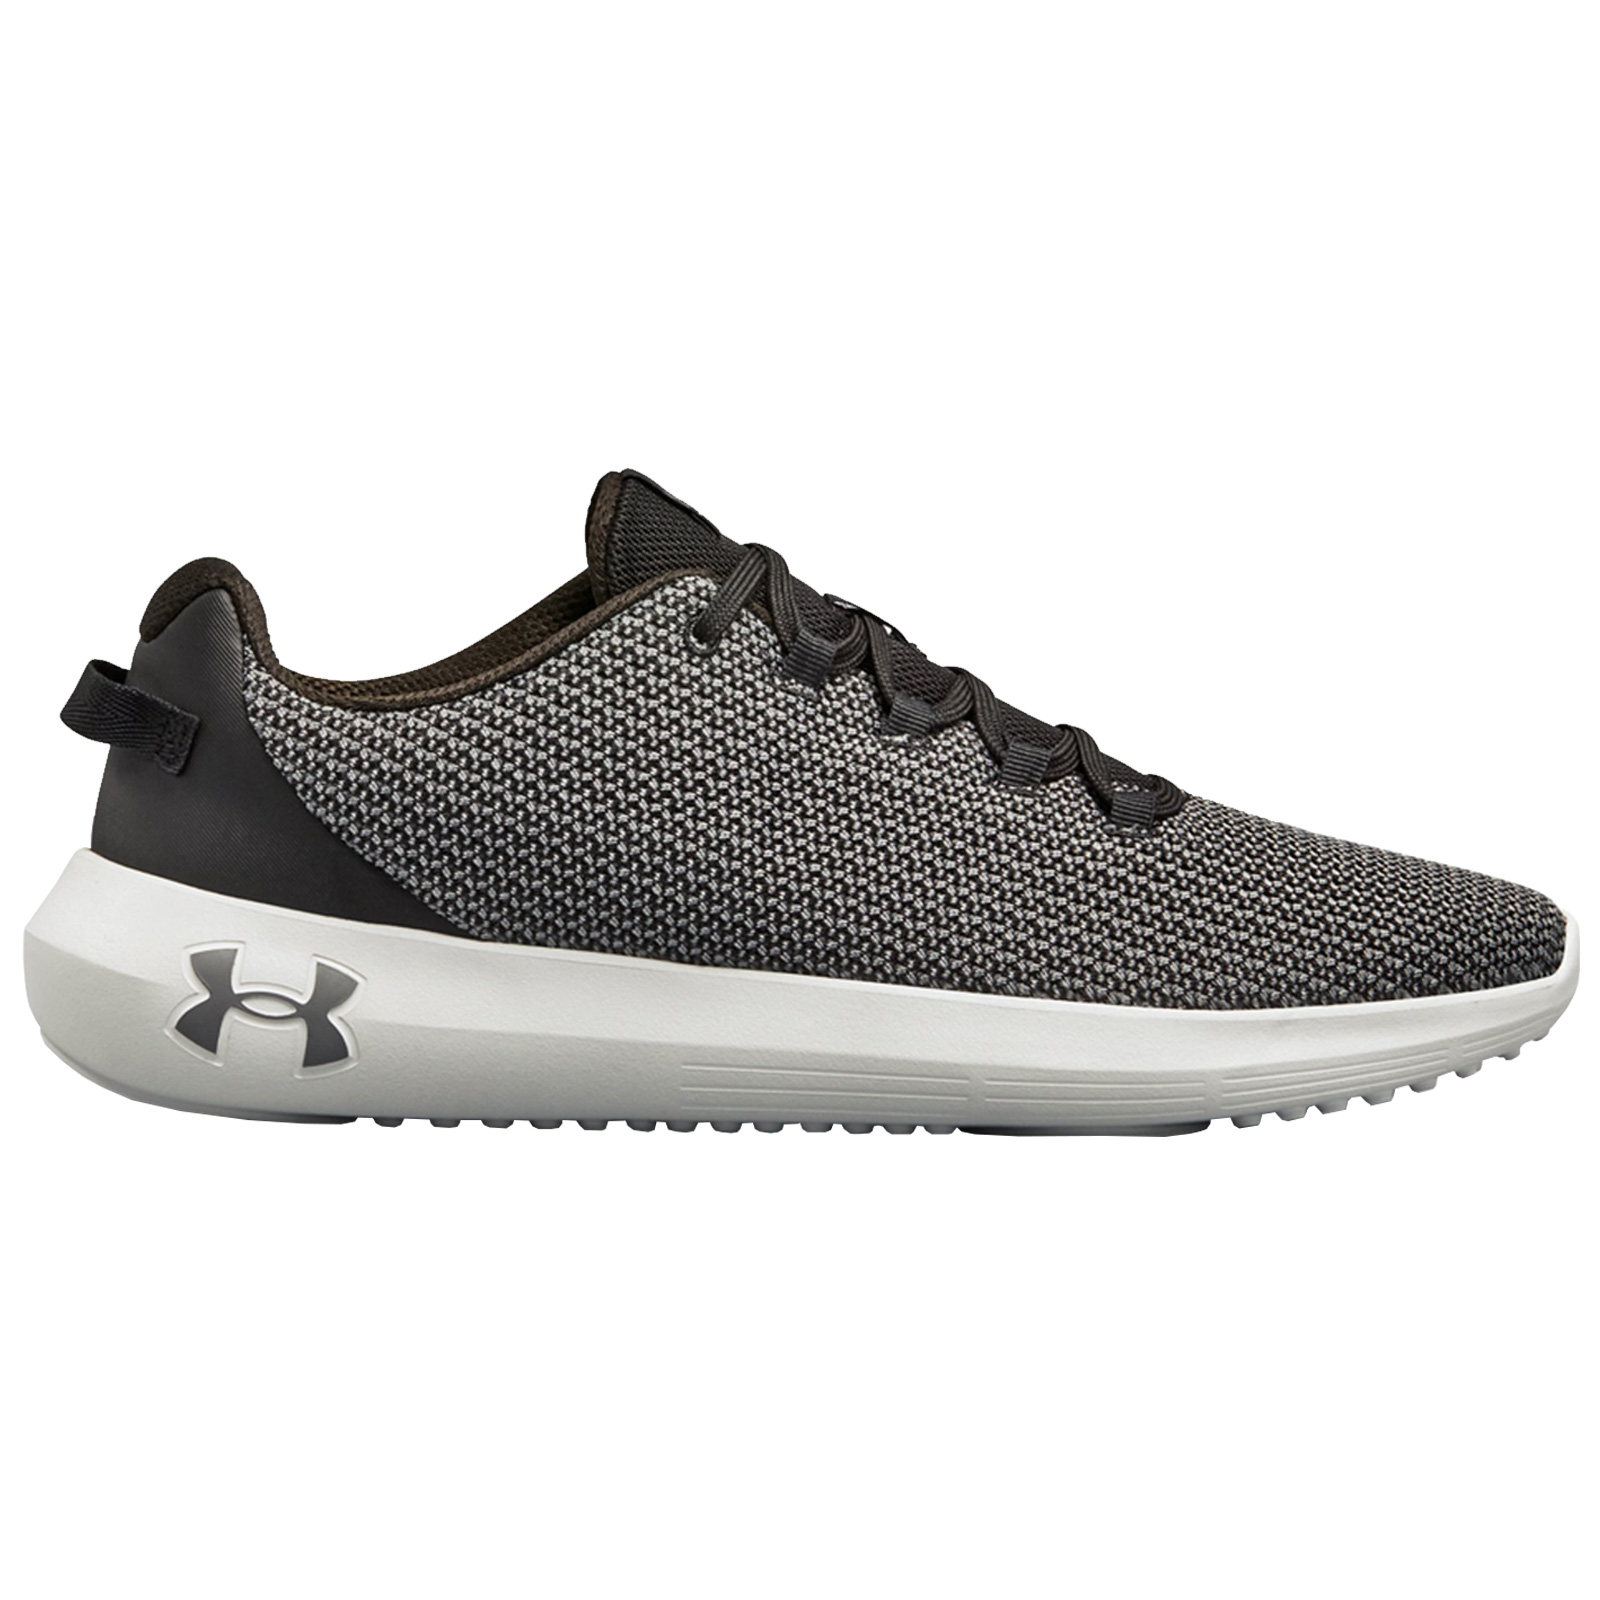 Under Armour Mens Ripple Trainers - UA Running Shoes Training Gym ...